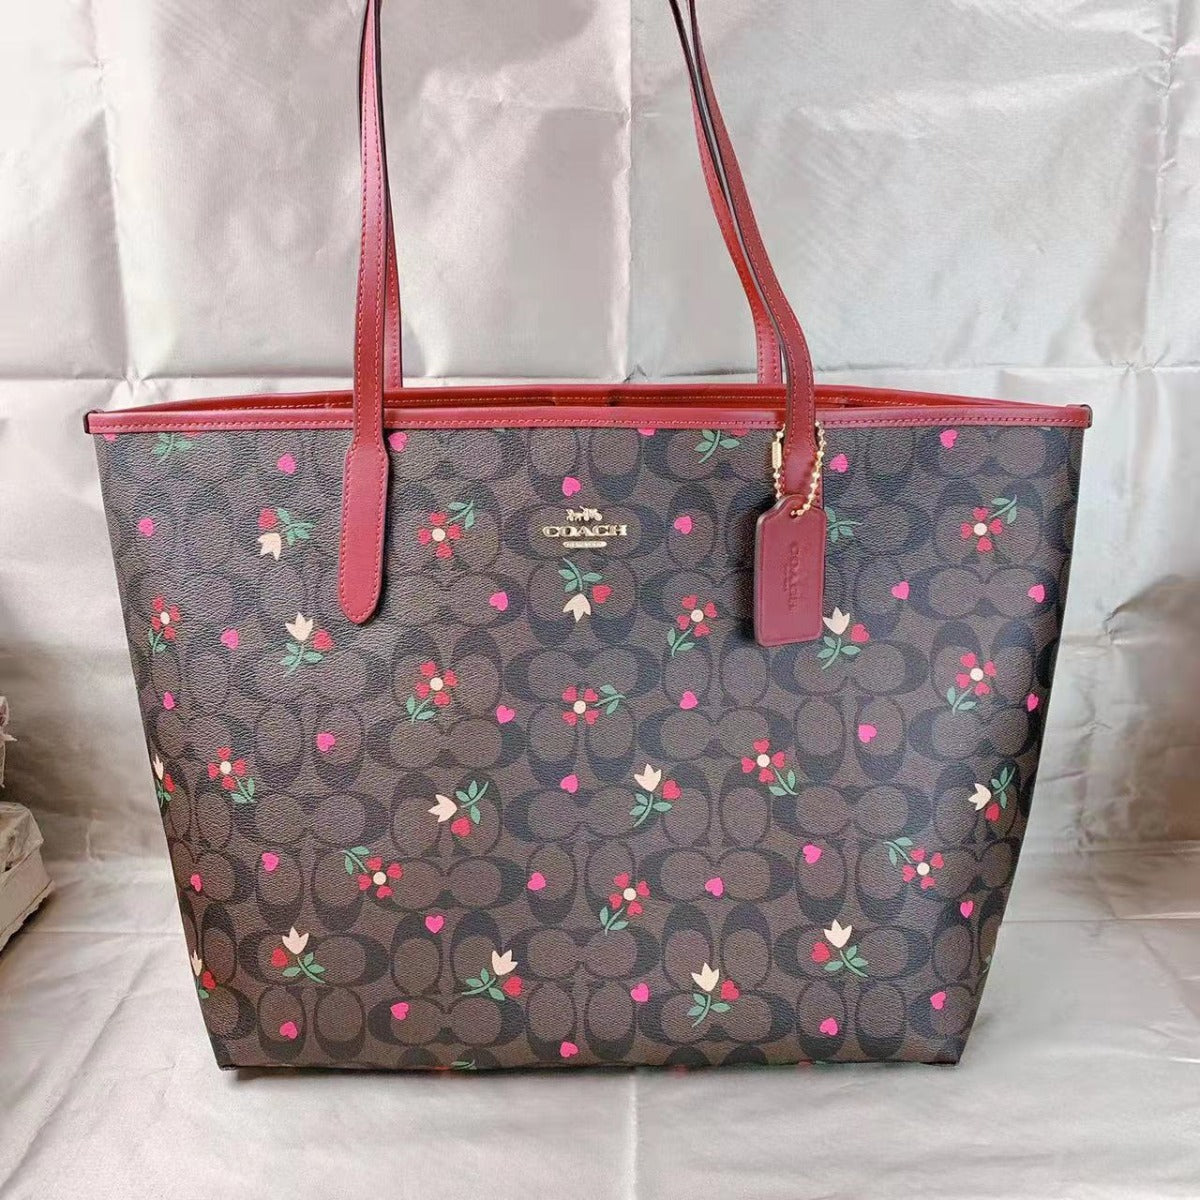 Coach C7616 City Tote In Signature Canvas With Heart Petal Print In Gold/BROWN MULTI